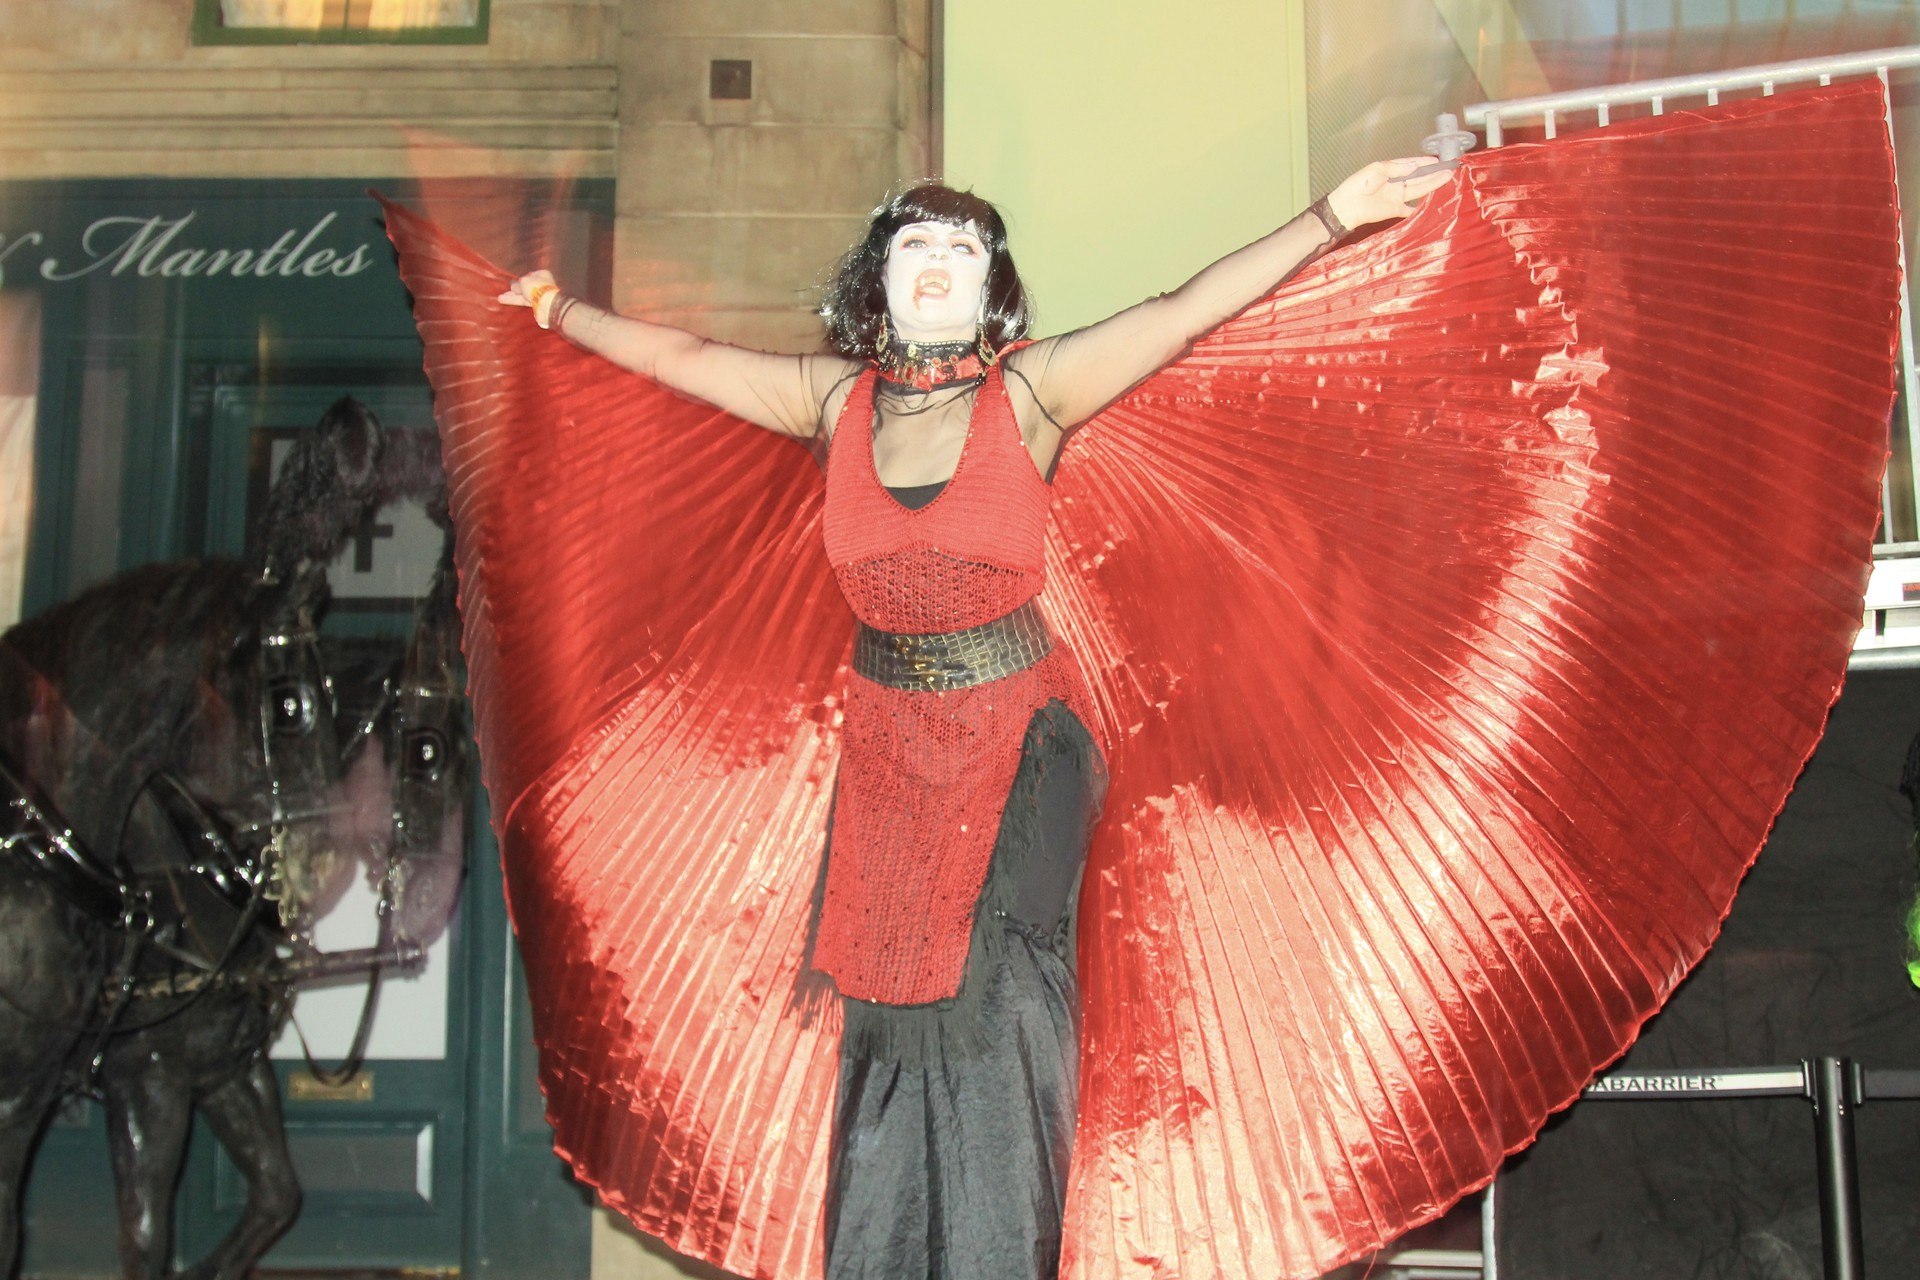 Drag performers and stilt walkers are to perform at Riverside Museum's Melting Pot event 